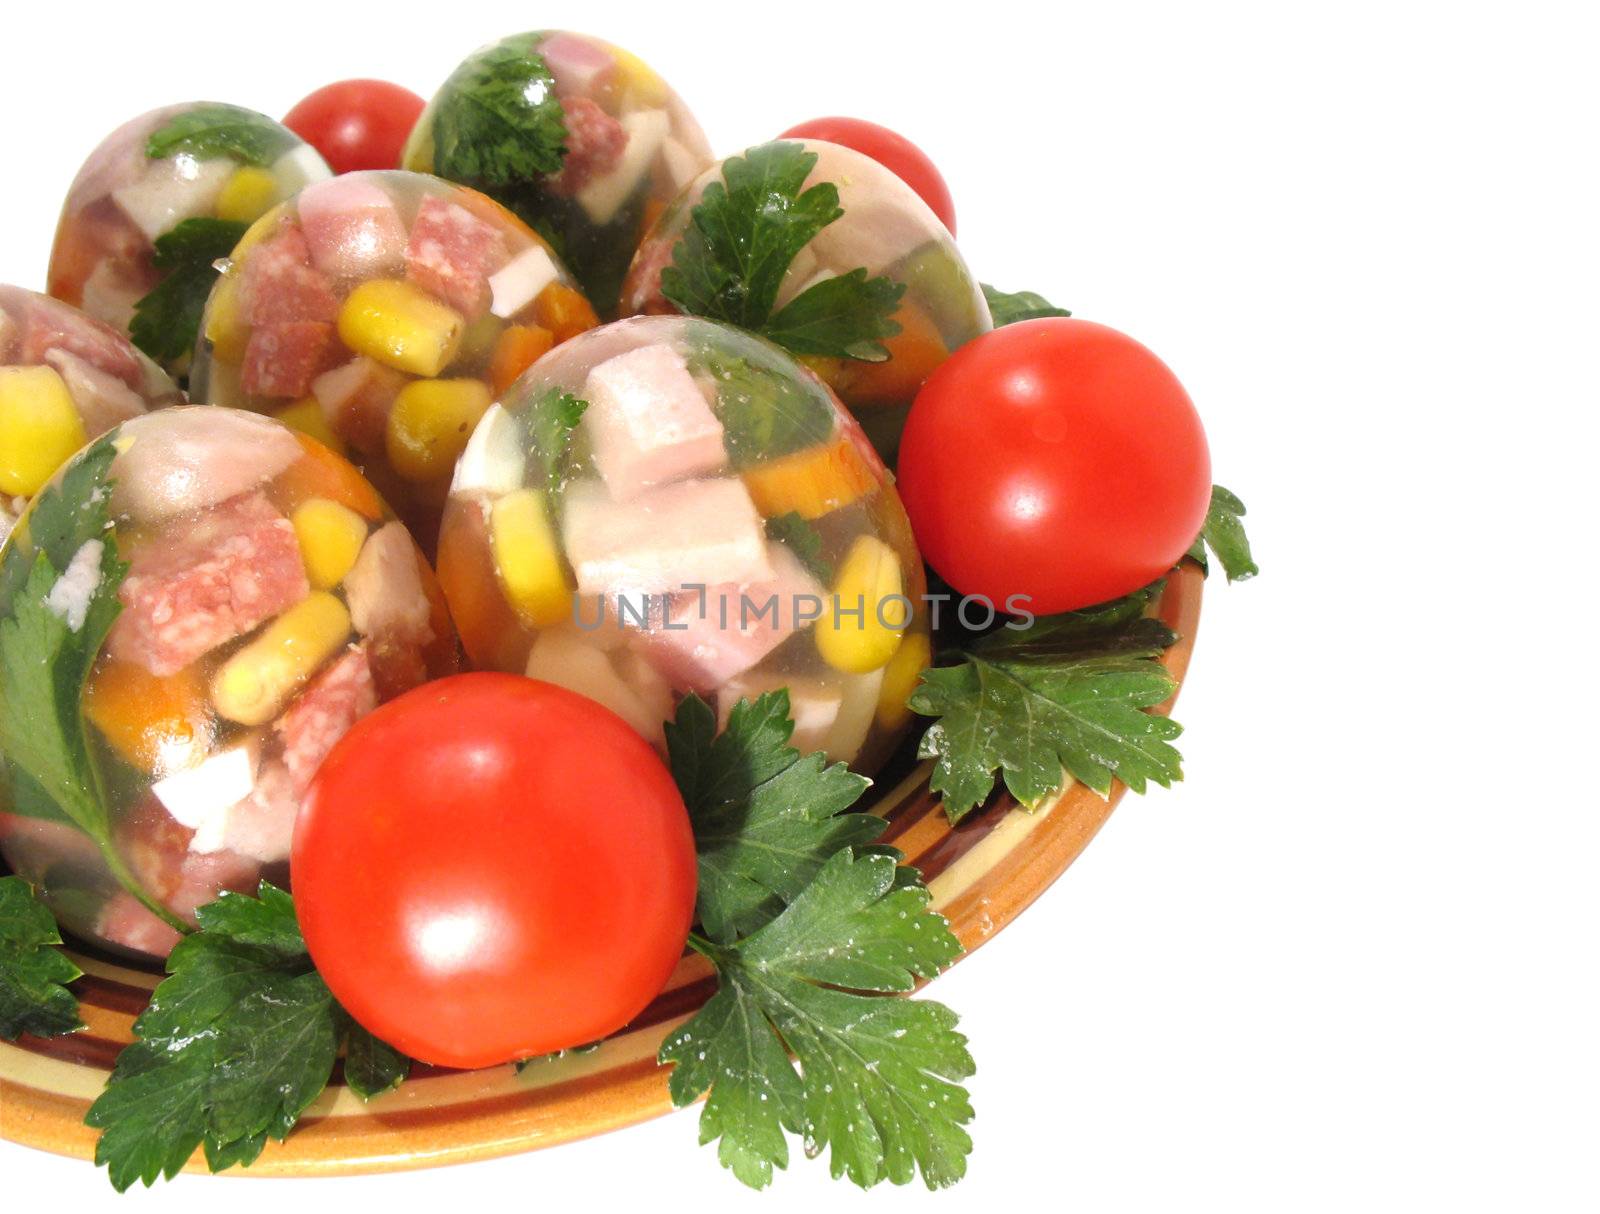 Appetizing jellied eggs with greens and tomatoes on a white background, with clipping path